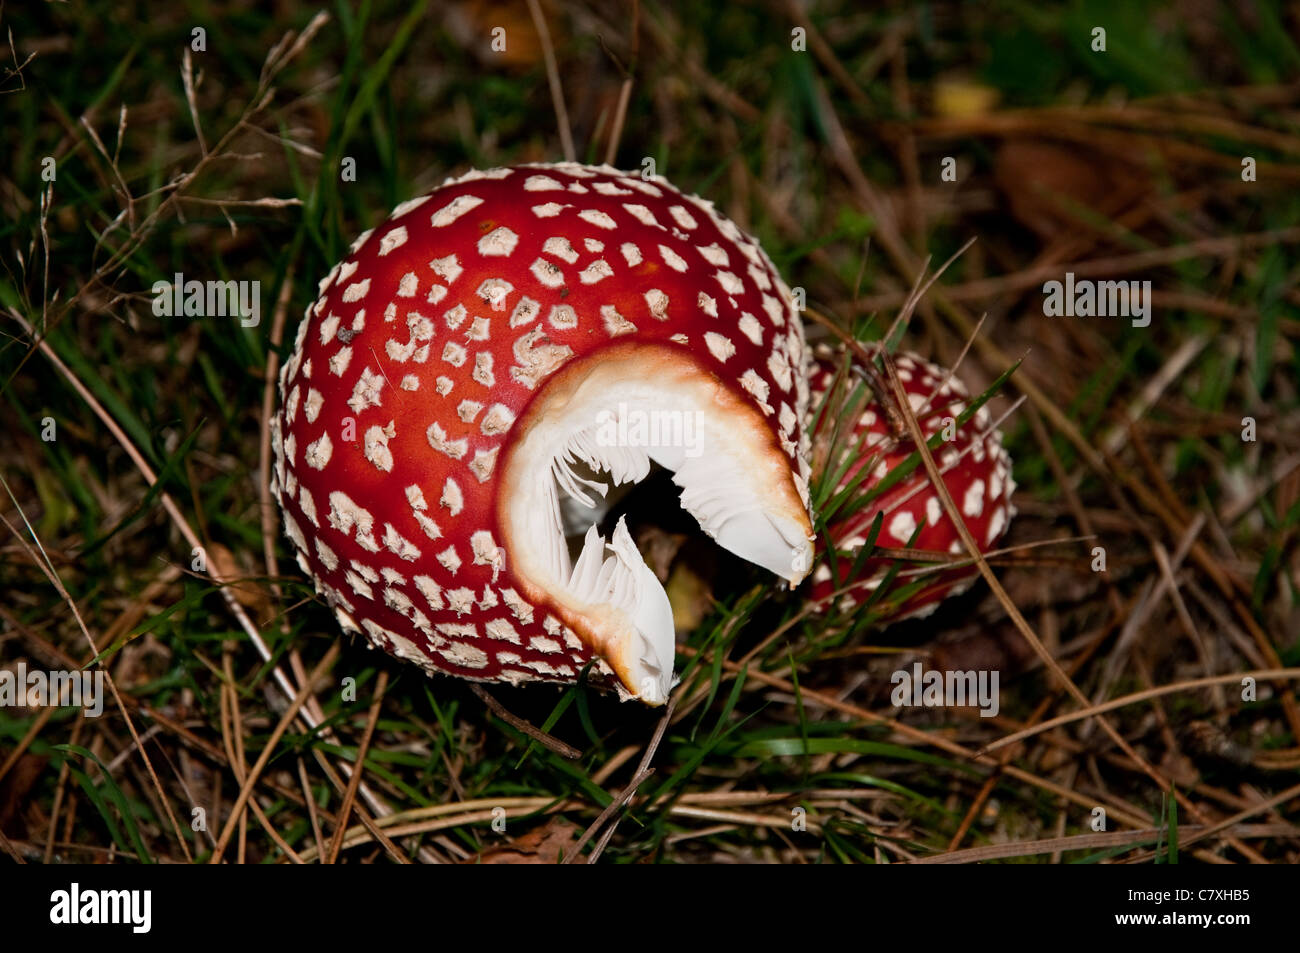 Fly Agaric mushrooms in the grass Stock Photo